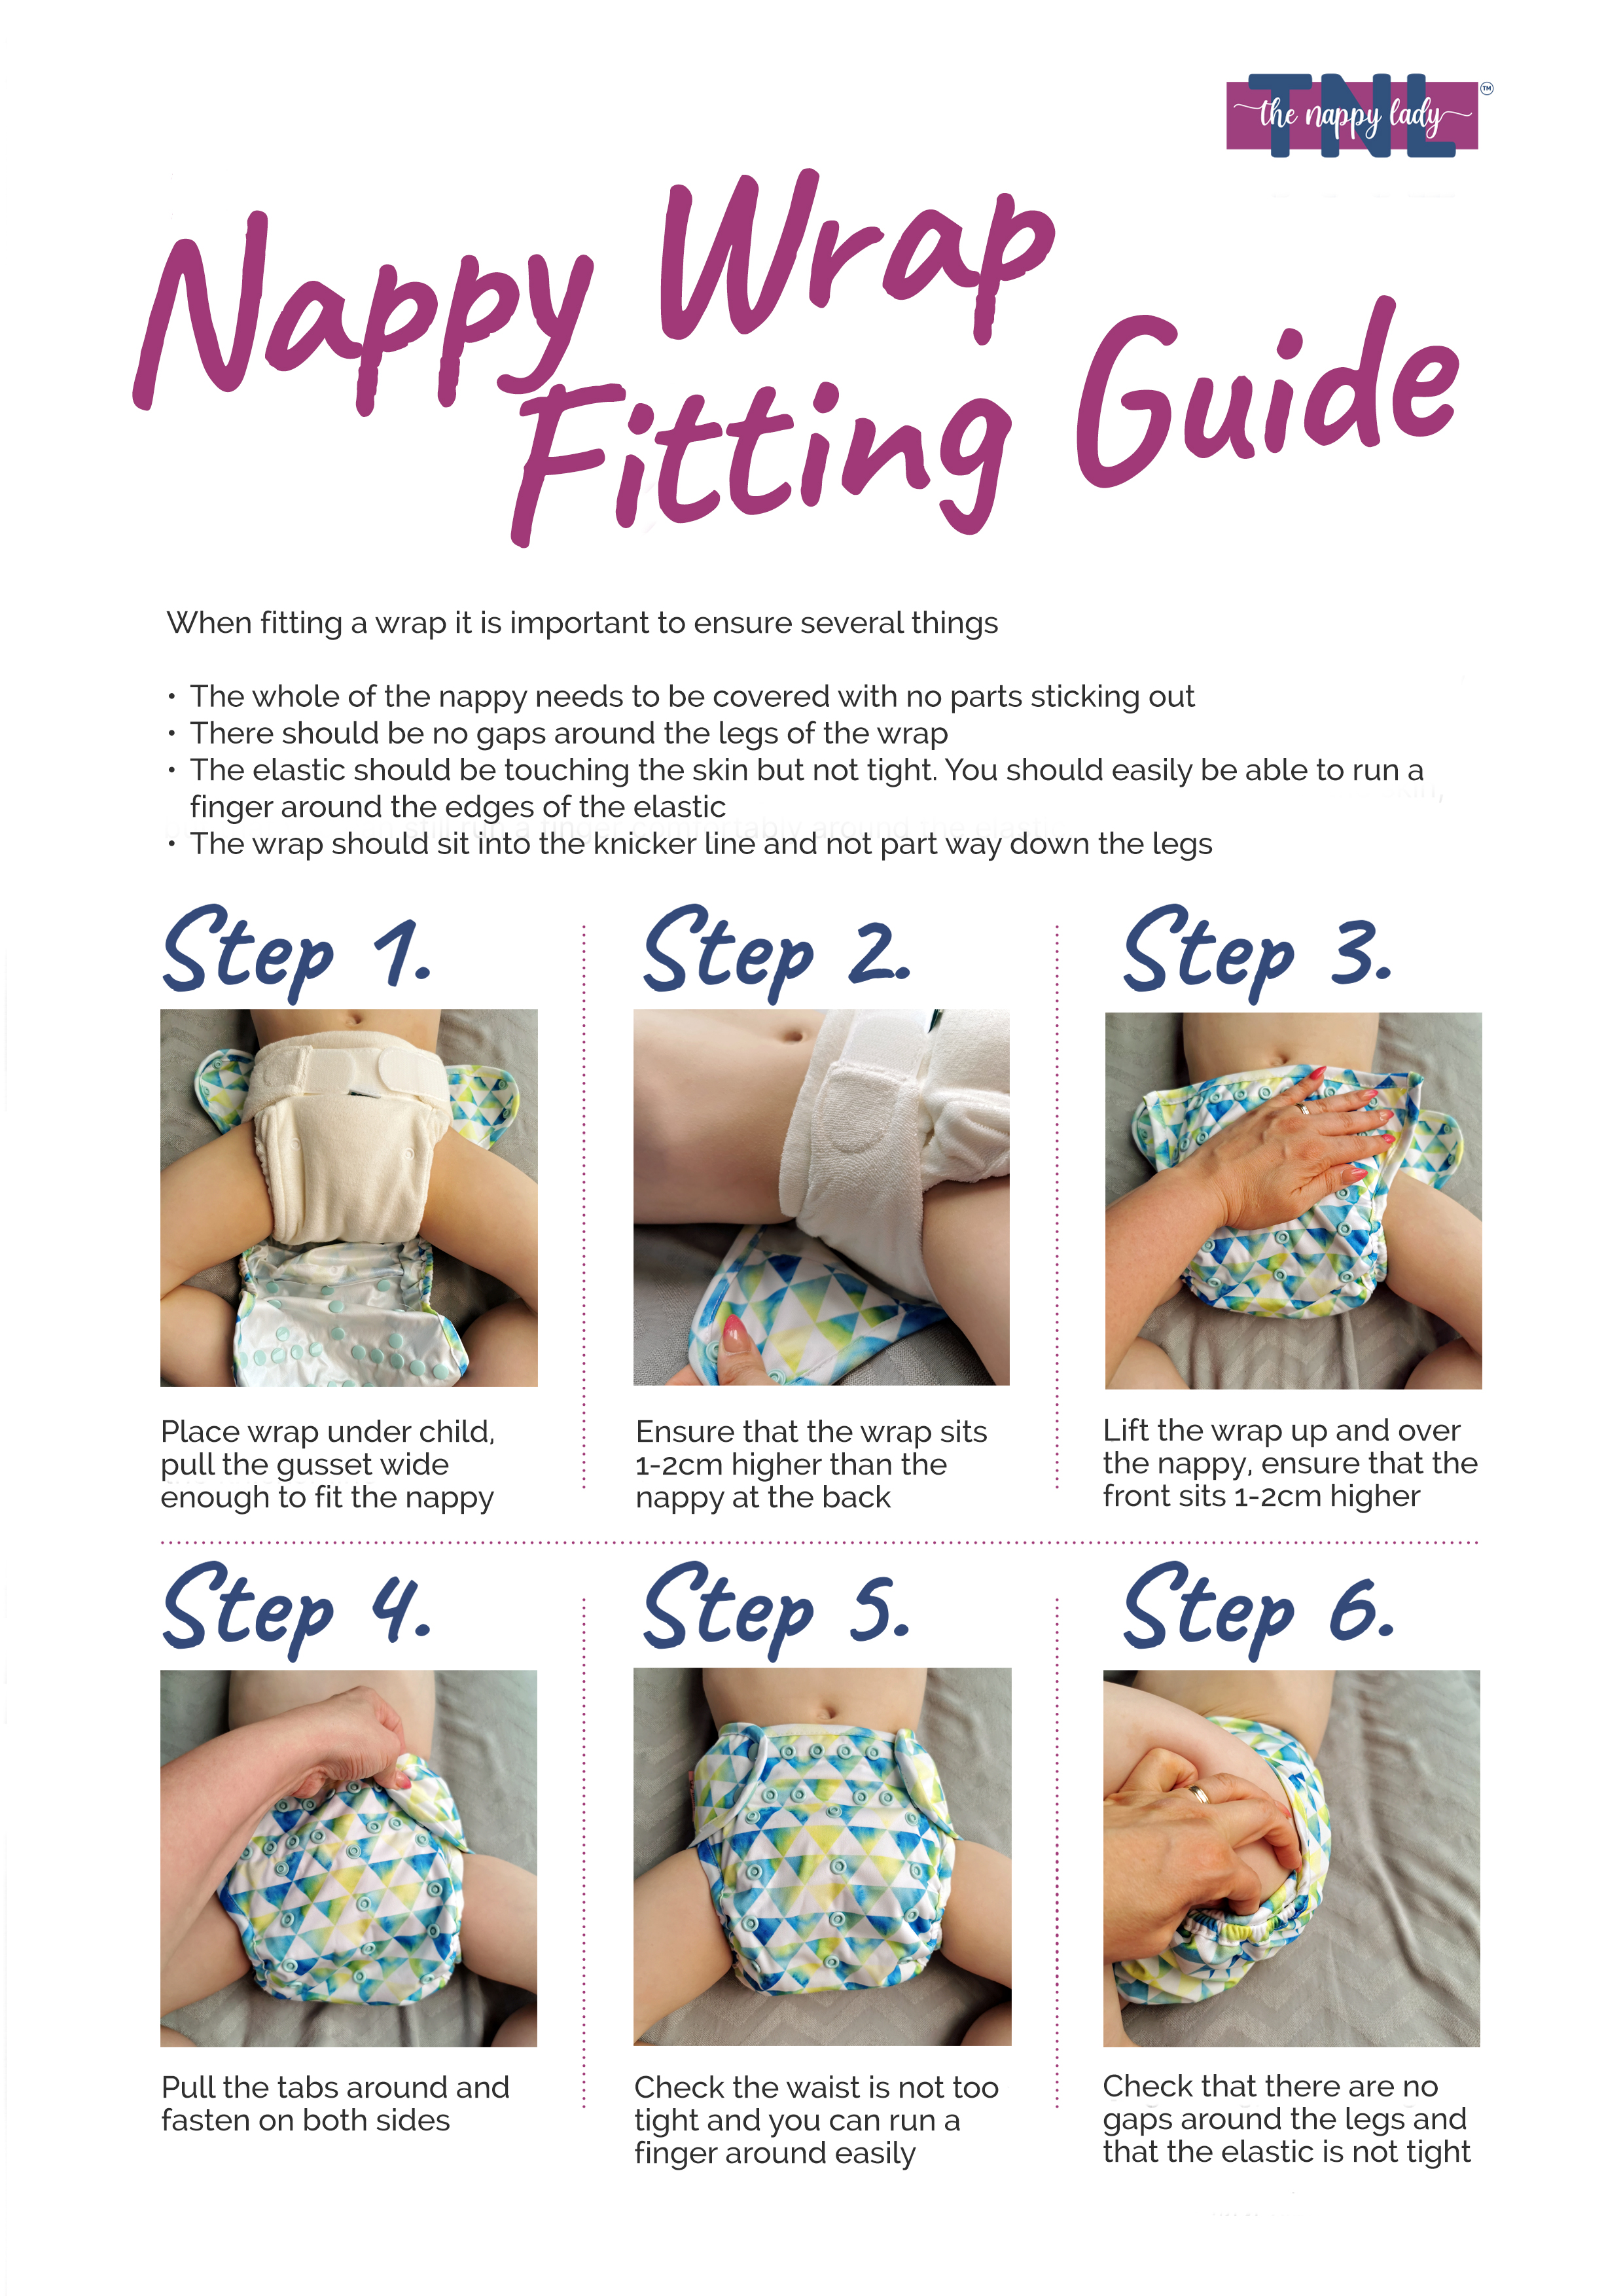 TNL's Nappy Wrap Fitting Guide